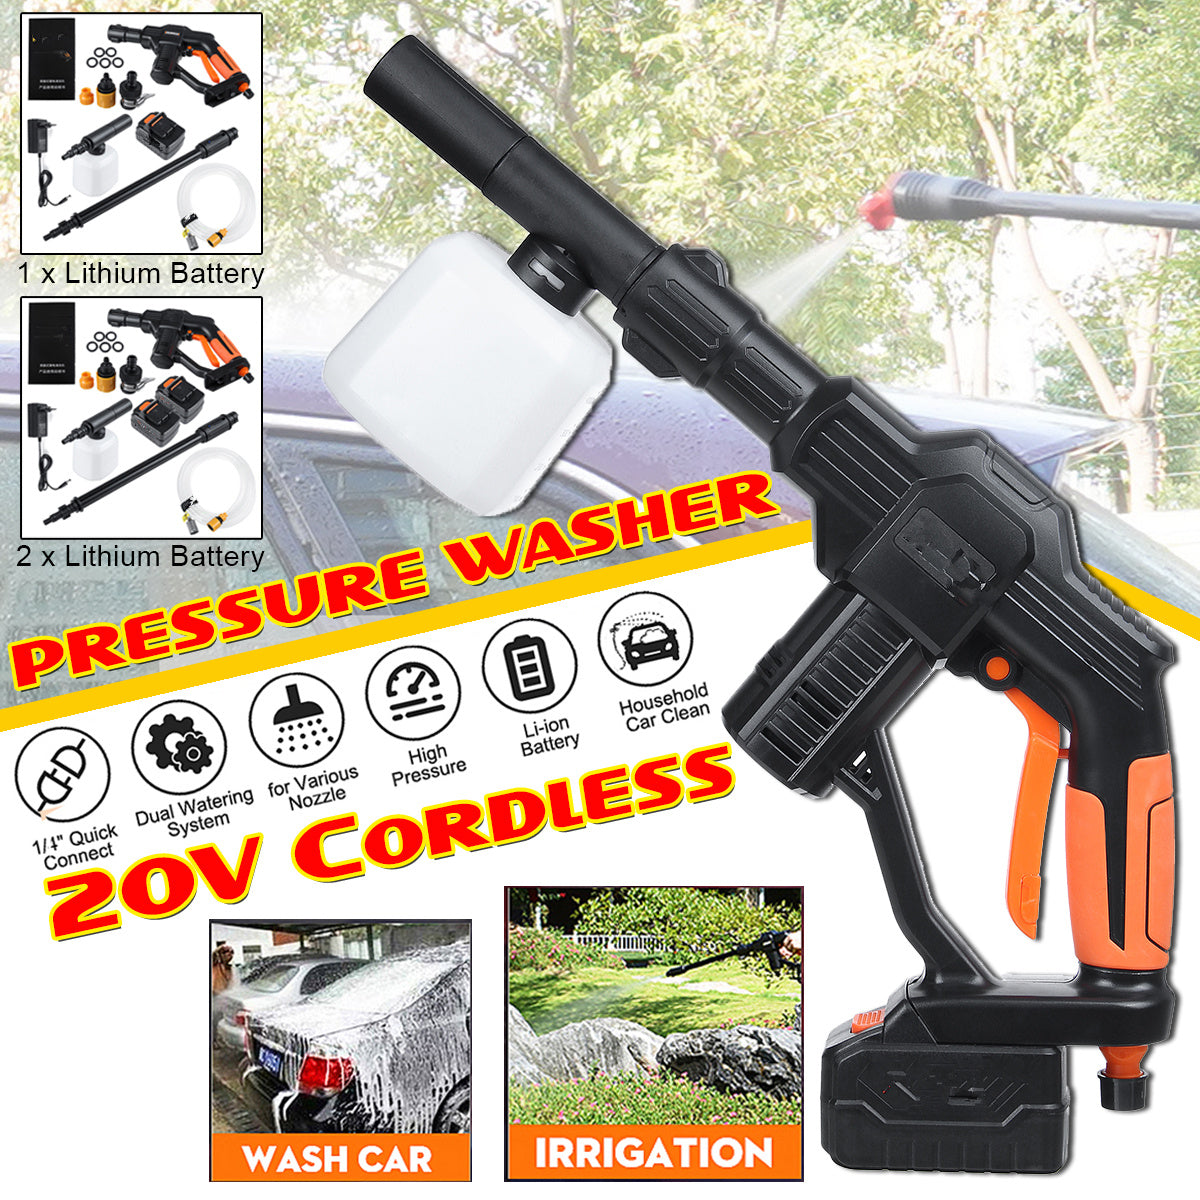 Gold 20V Cordless Portable Pressure Cleaner Washer Car Mototcycle Courtyard Glass Cleaning